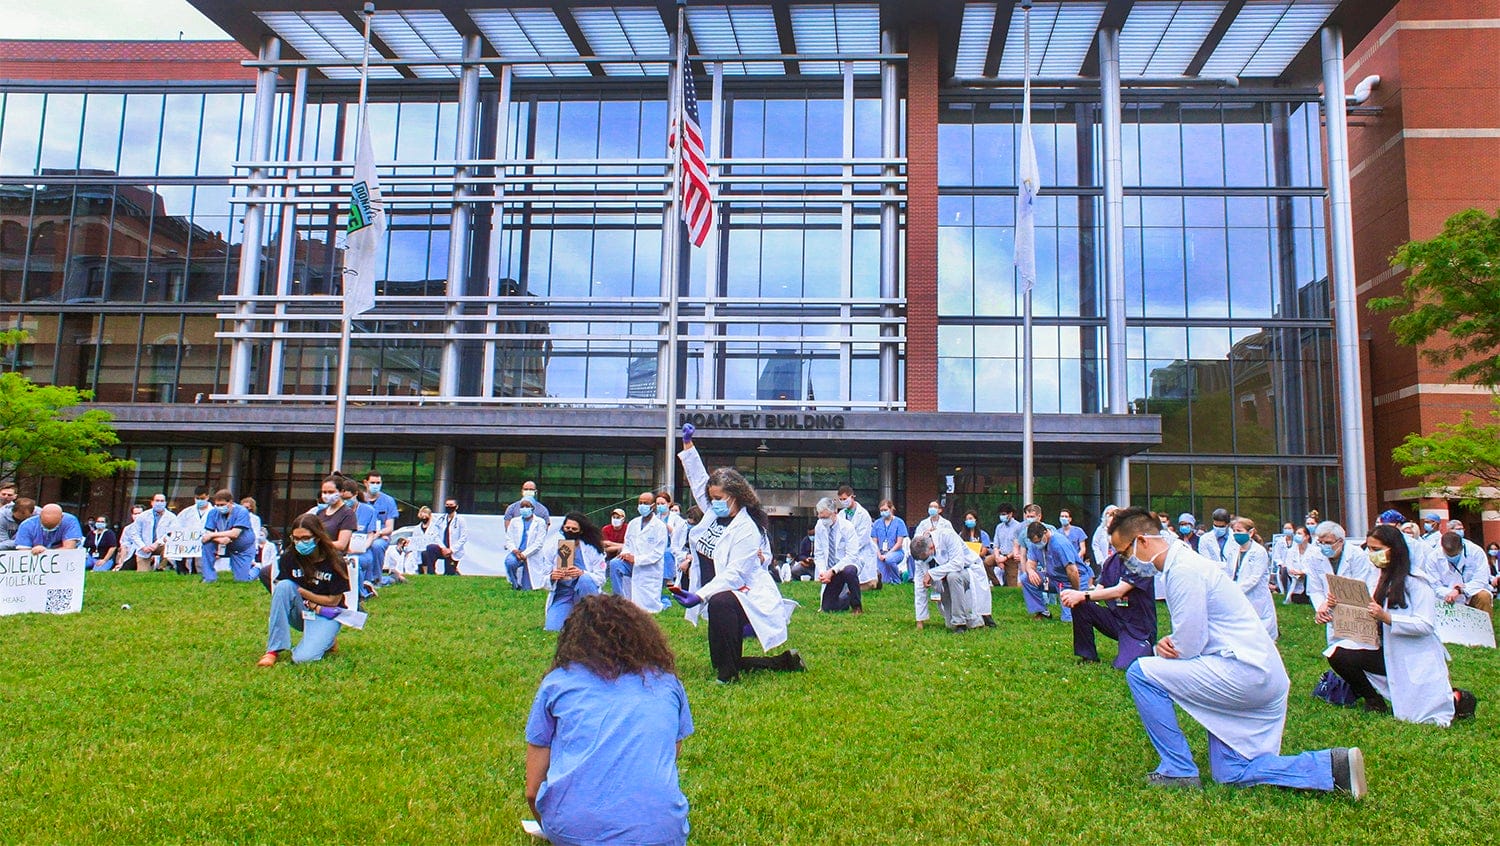 Physicians kneel on the lawn outside Boston Medical Center in a display of solidarity with #WhiteCoatsBlackLives